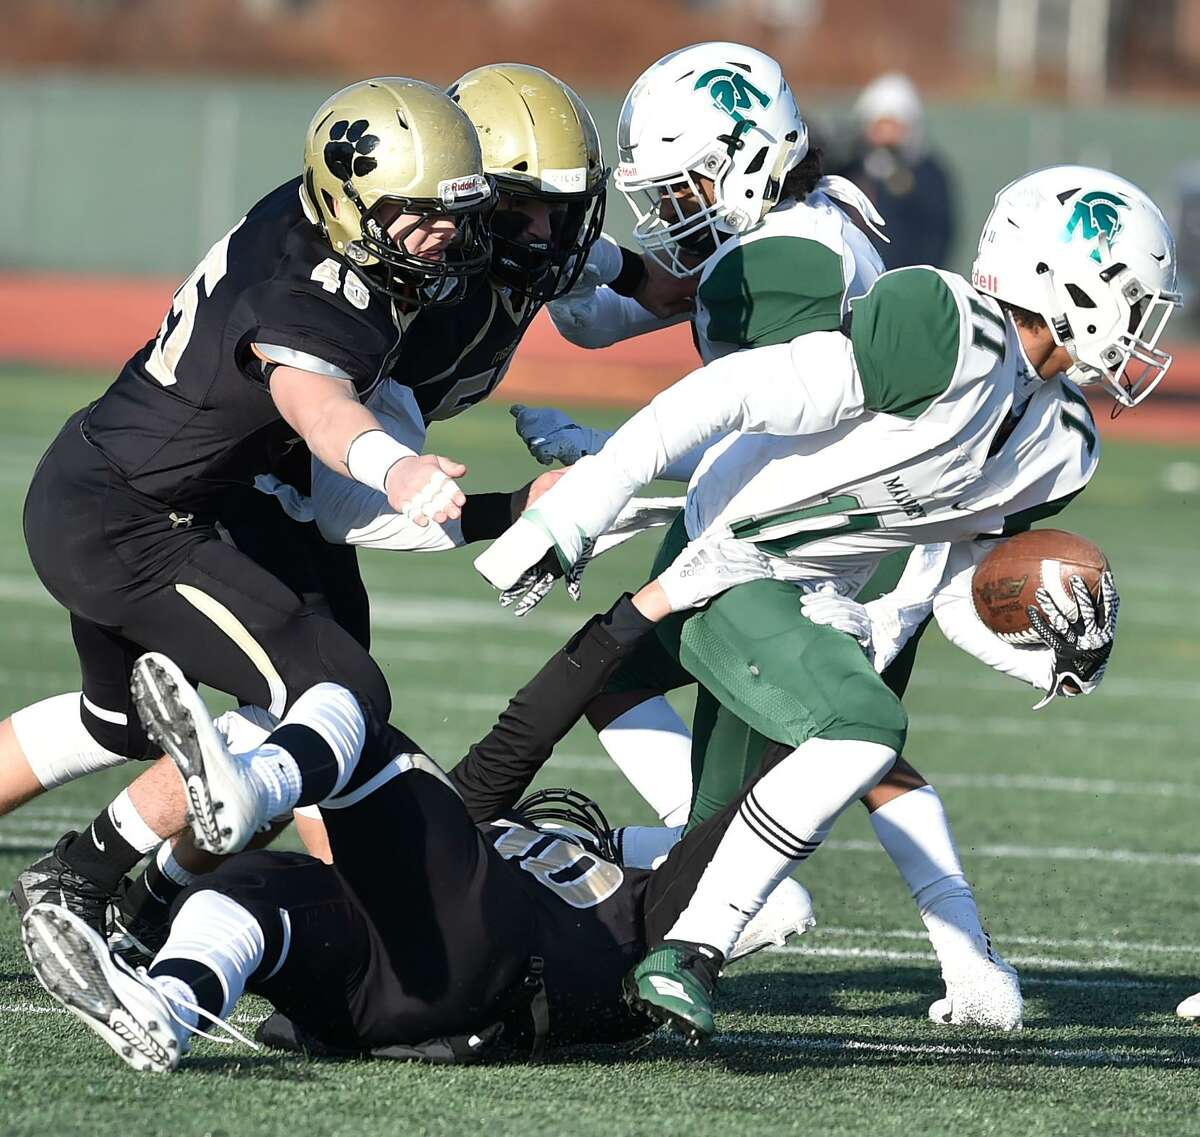 New Britain, Connecticut - Saturday, December 8, 2018: Daniel Hand H.S. vs. Maloney H.S. during first half football of the CIAC Class L Championship Game Saturday afternoon at Willowbrook Park Stadium in New Britain.